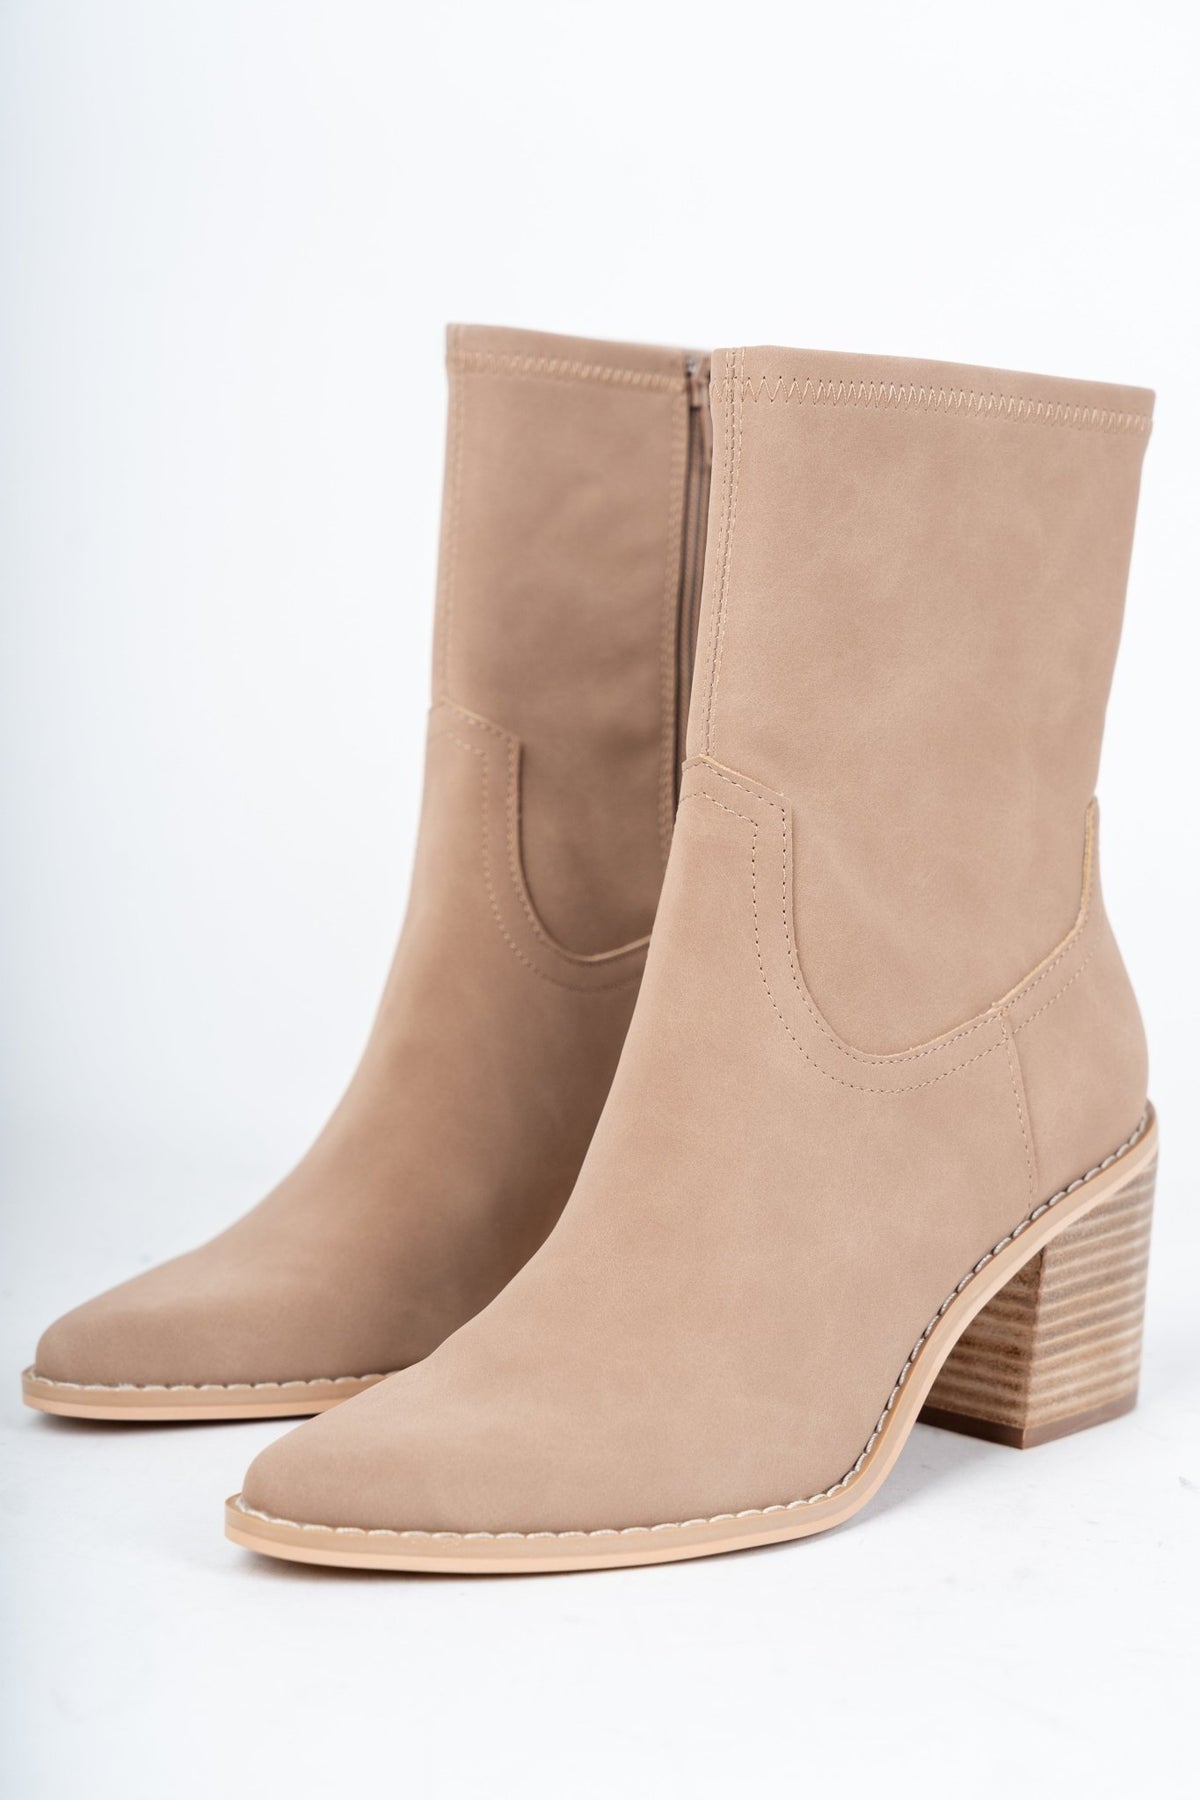 Vienna sleek ankle bootie cedar wood - Cute shoes - Trendy Shoes at Lush Fashion Lounge Boutique in Oklahoma City